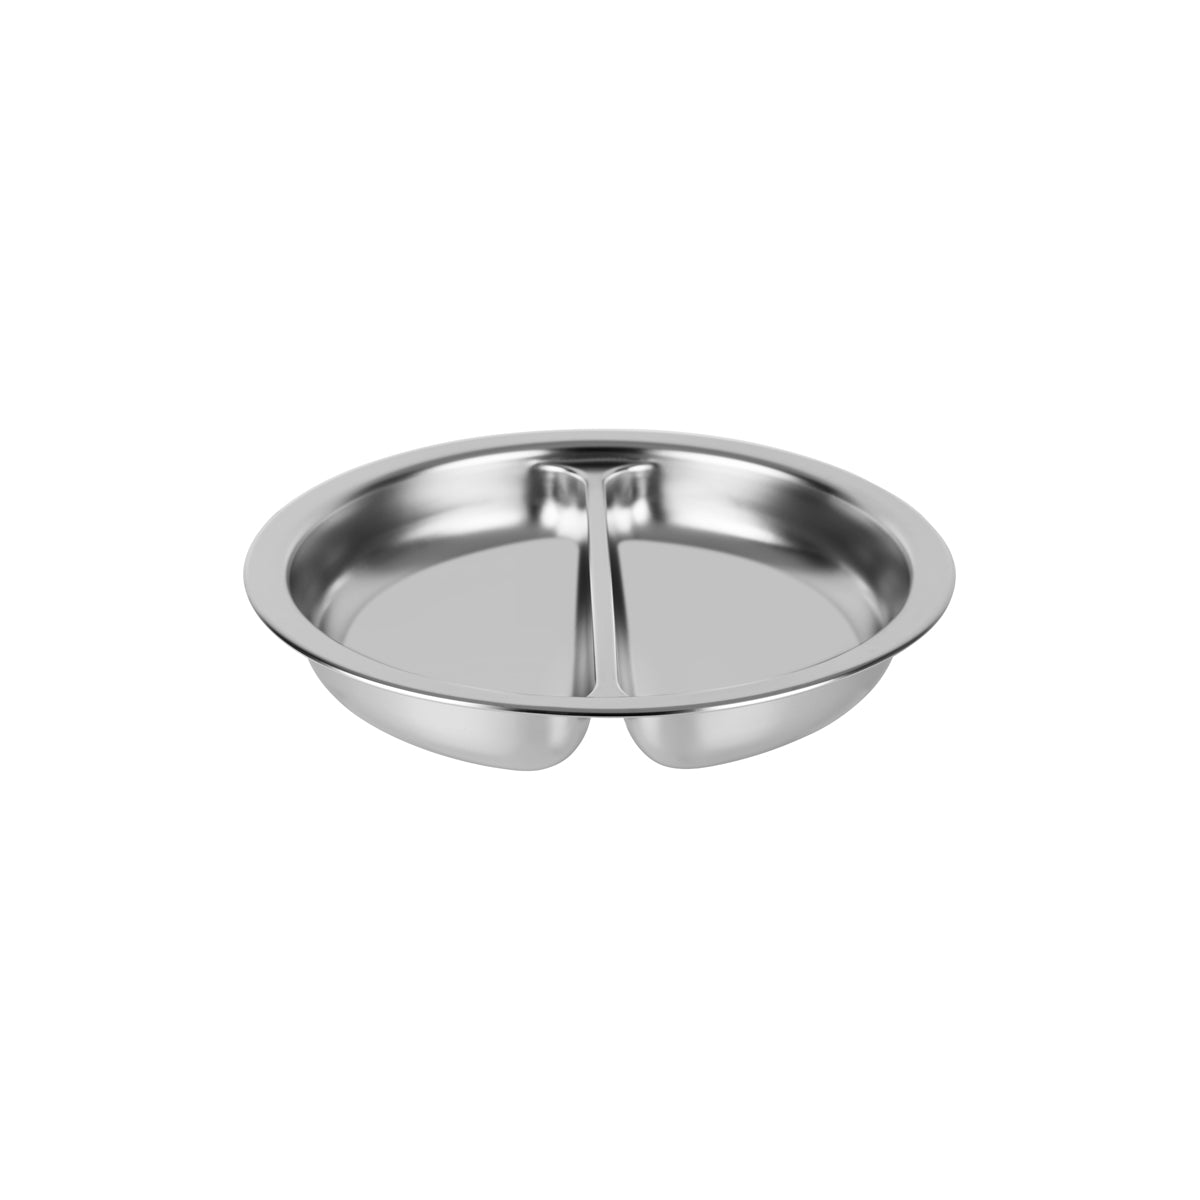 54905-D Chef Inox Round Divided Pan Stainless Steel to Suit 54905 Tomkin Australia Hospitality Supplies